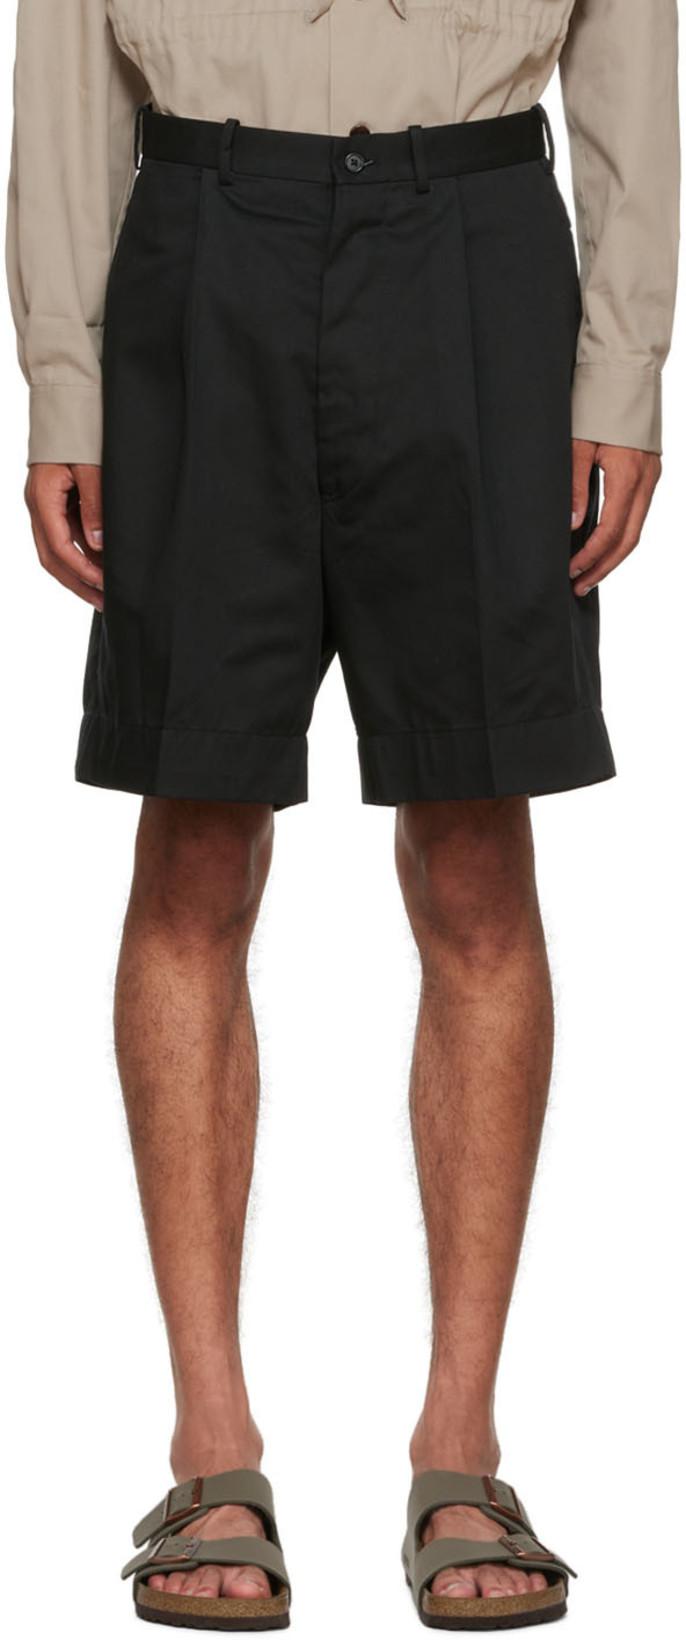 Black Cotton Shorts by CONNOR MC KNIGHT